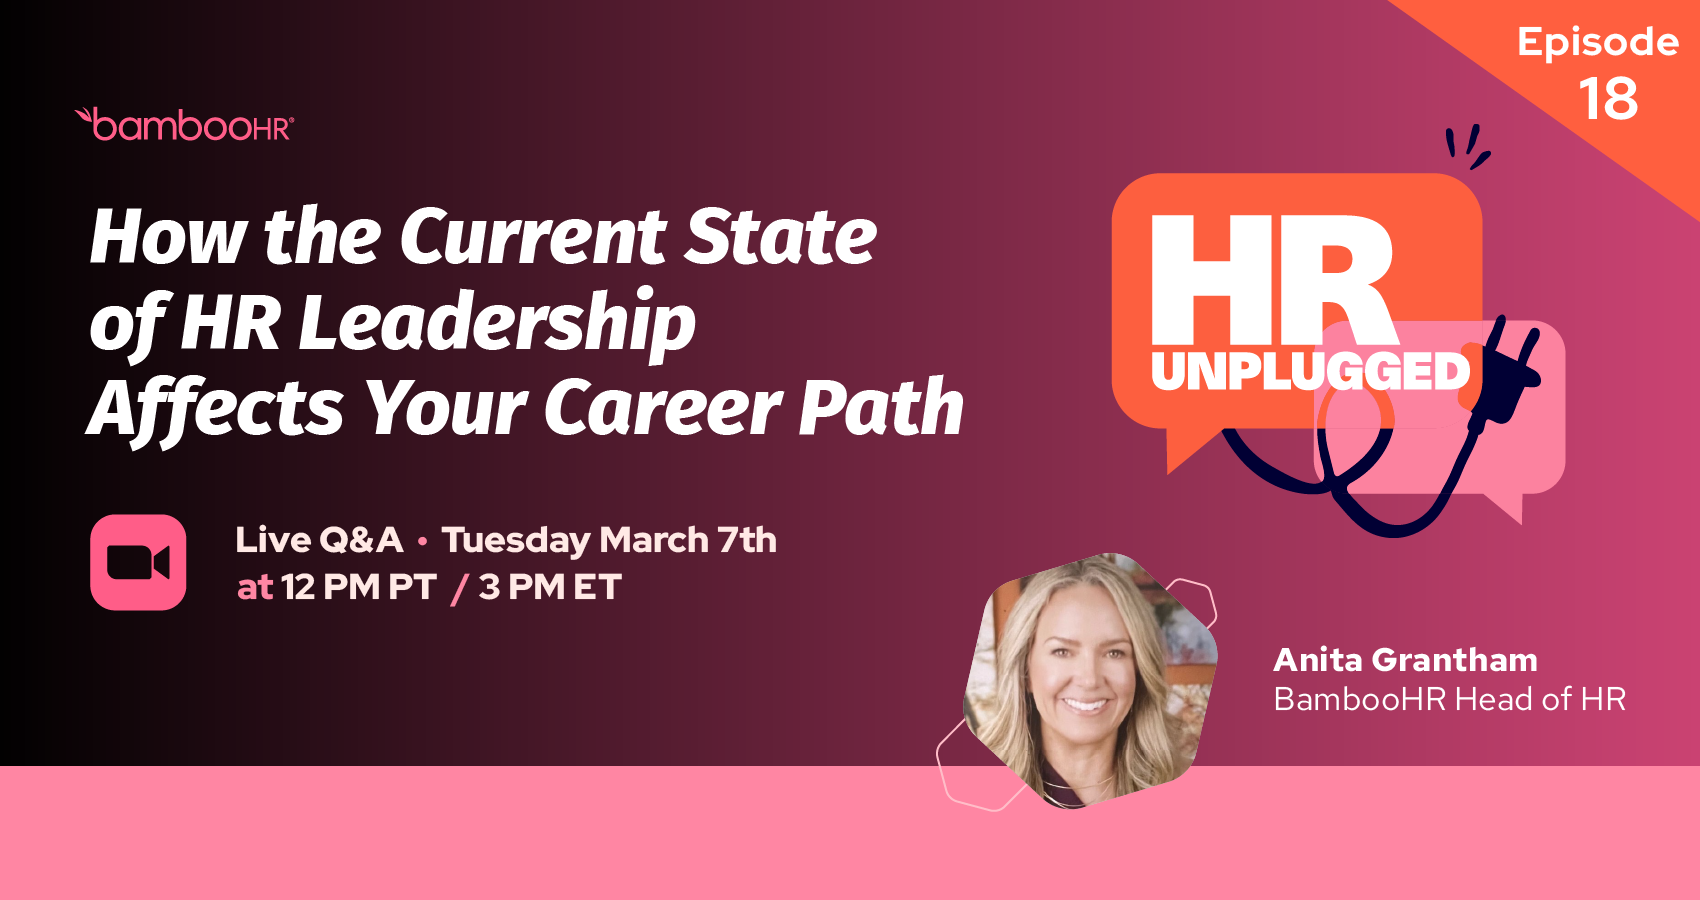 Episode 18: How the Current State of HR Leadership Affects Your Career Path